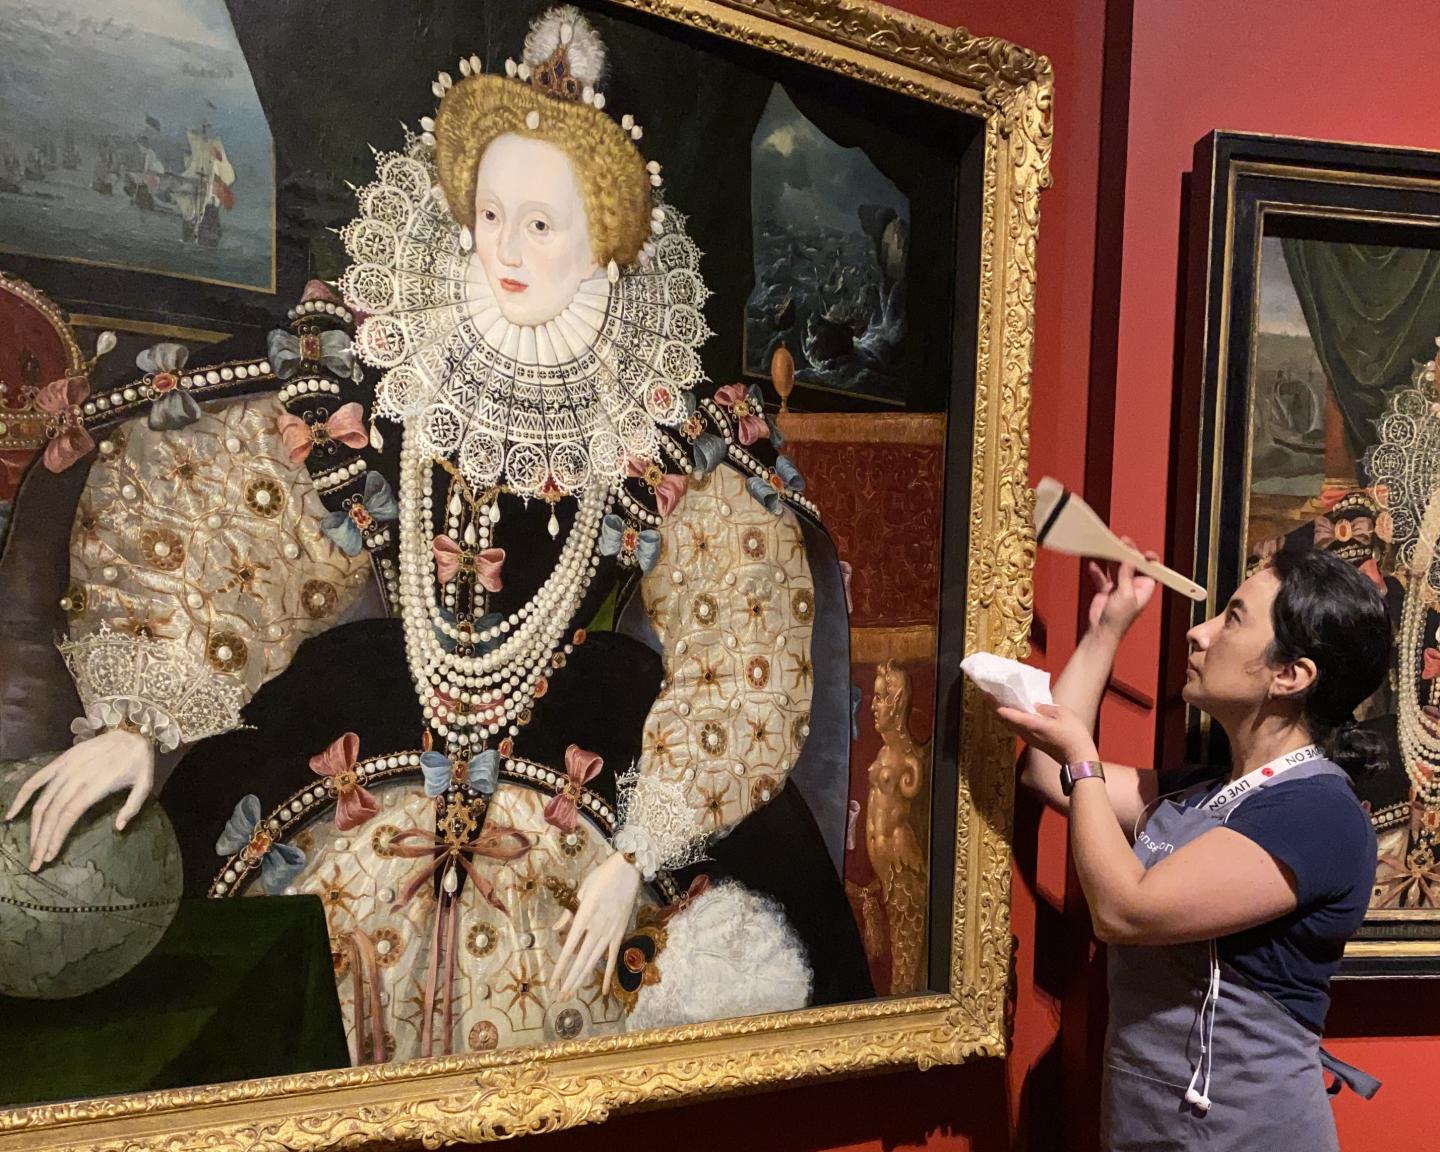 A museum conservator cleans the frame of a portrait of Elizabeth I